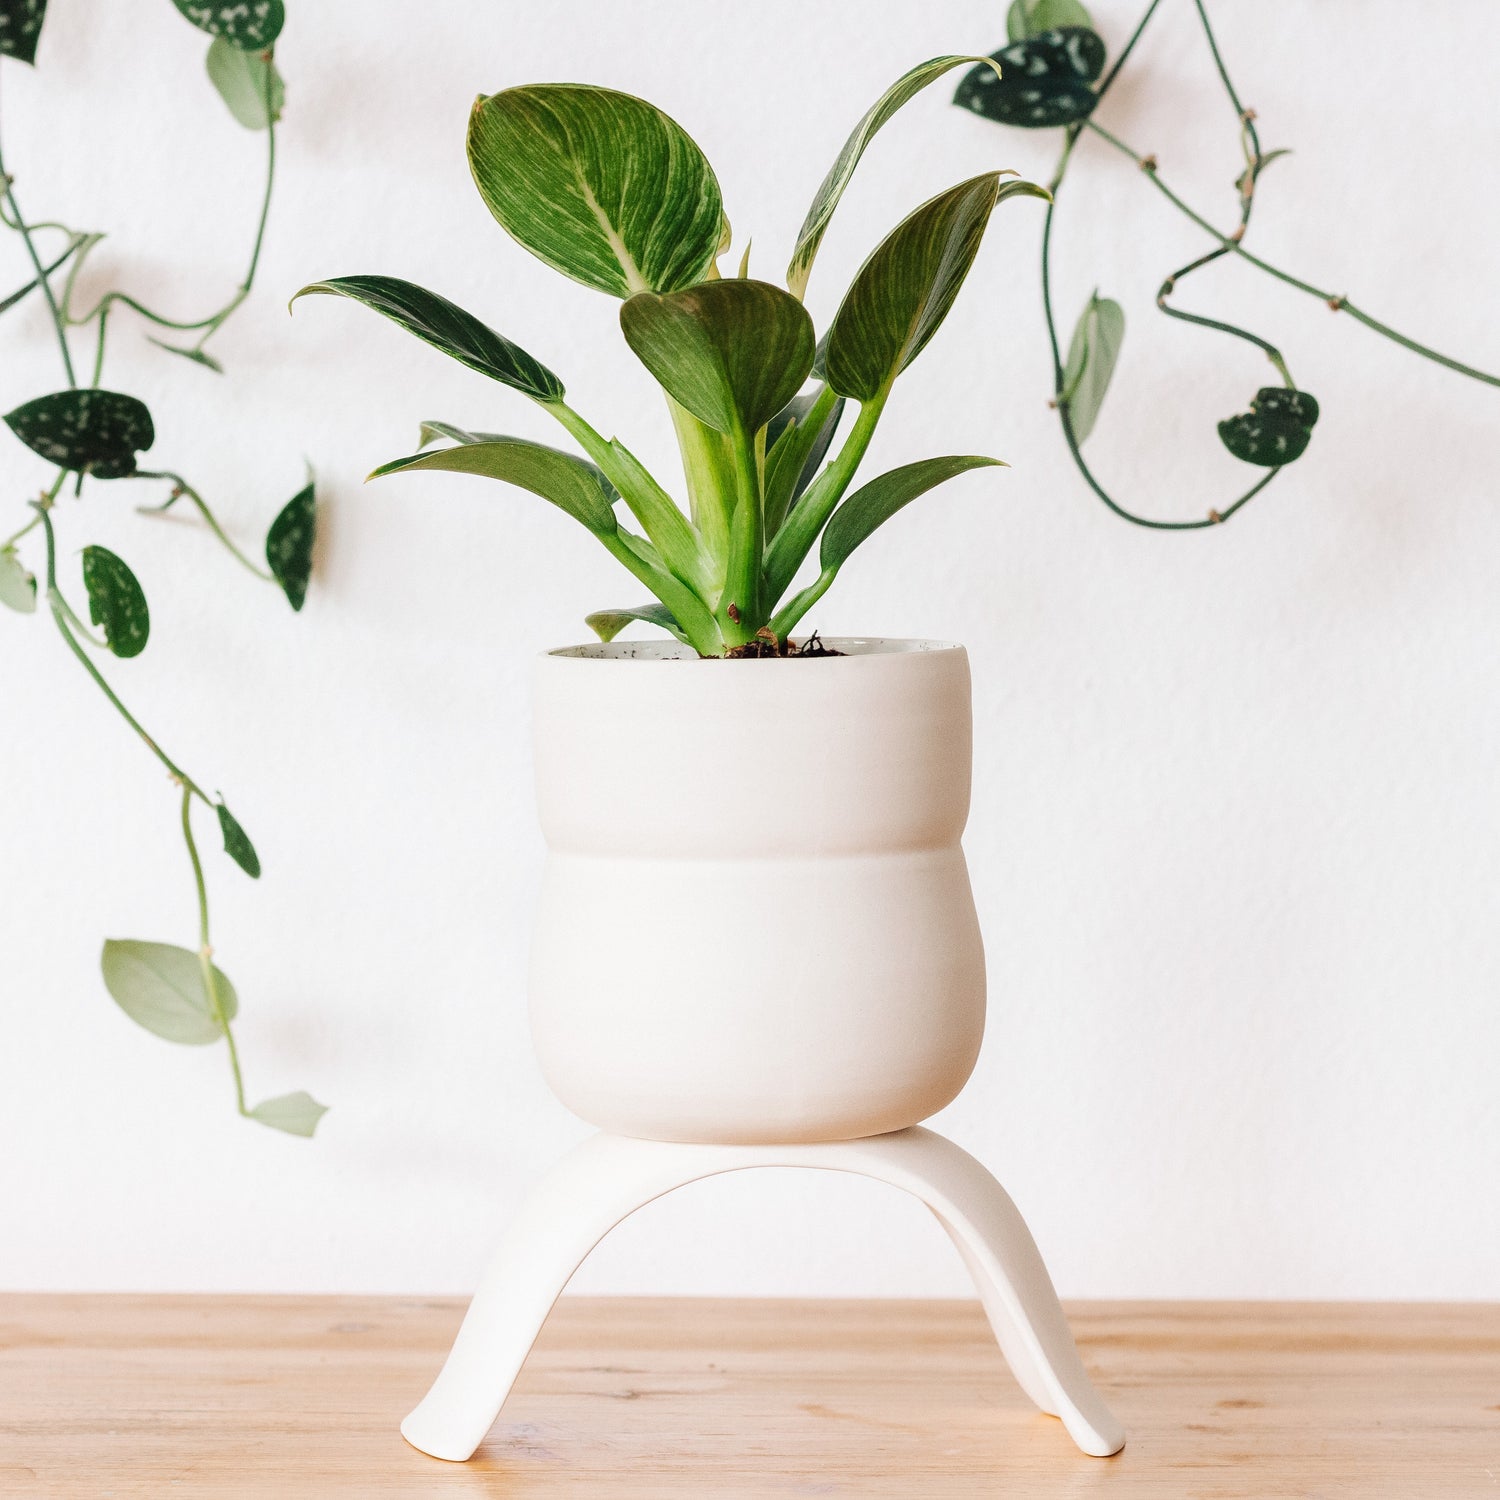 Give your plants a little lift - or use these porcelain planters as functional decor to hold candles, jewelry, as a catchall or in the kitchen.